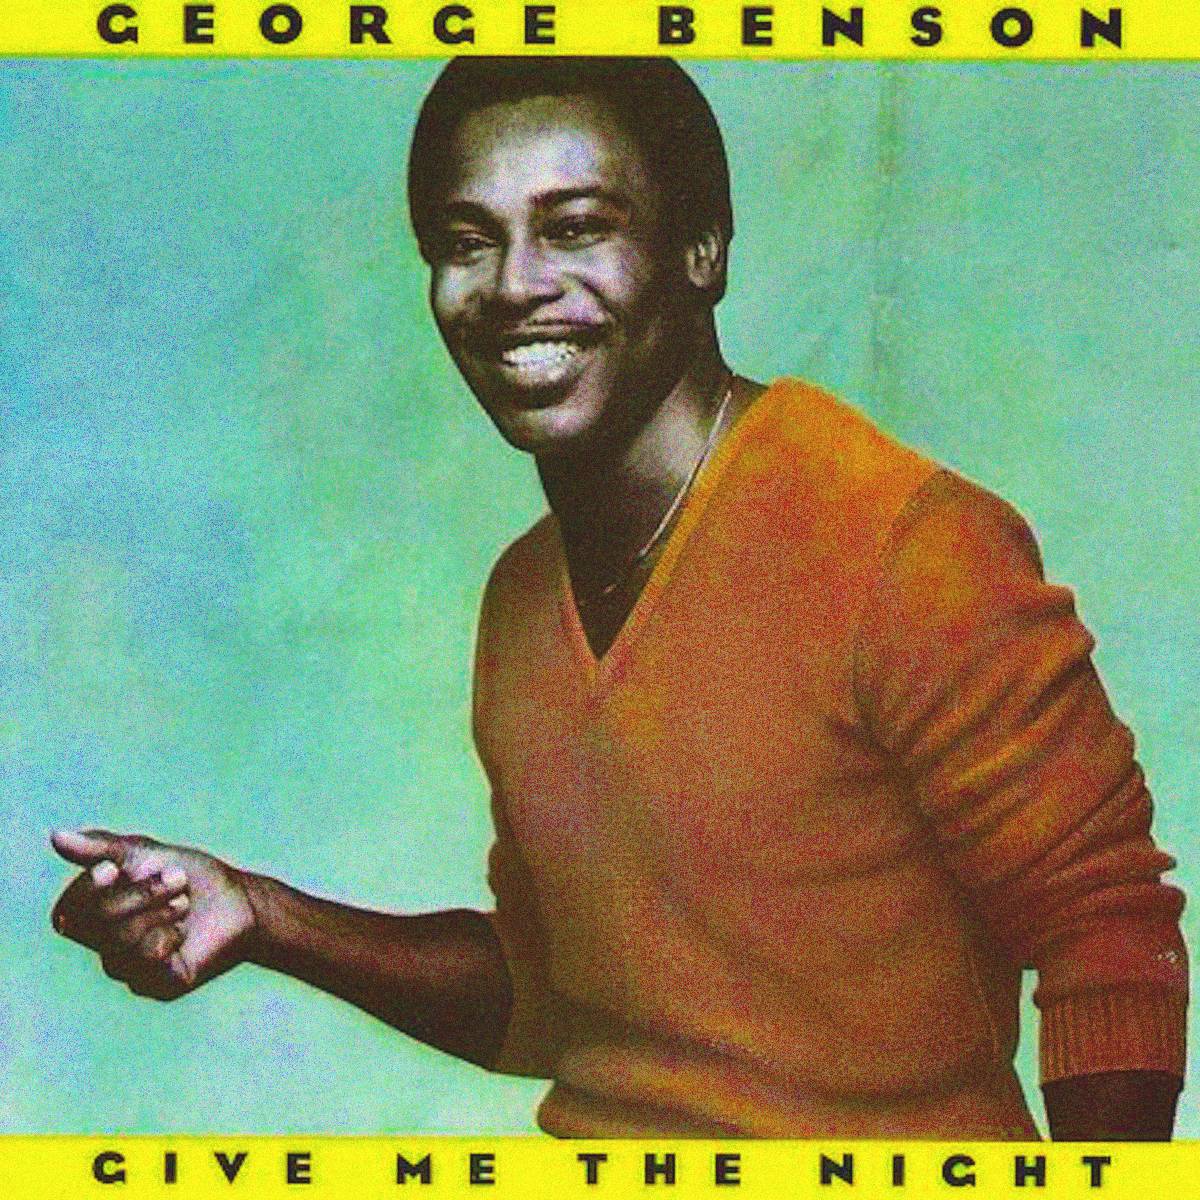 Give Me the Night Albumcover (George Benson)